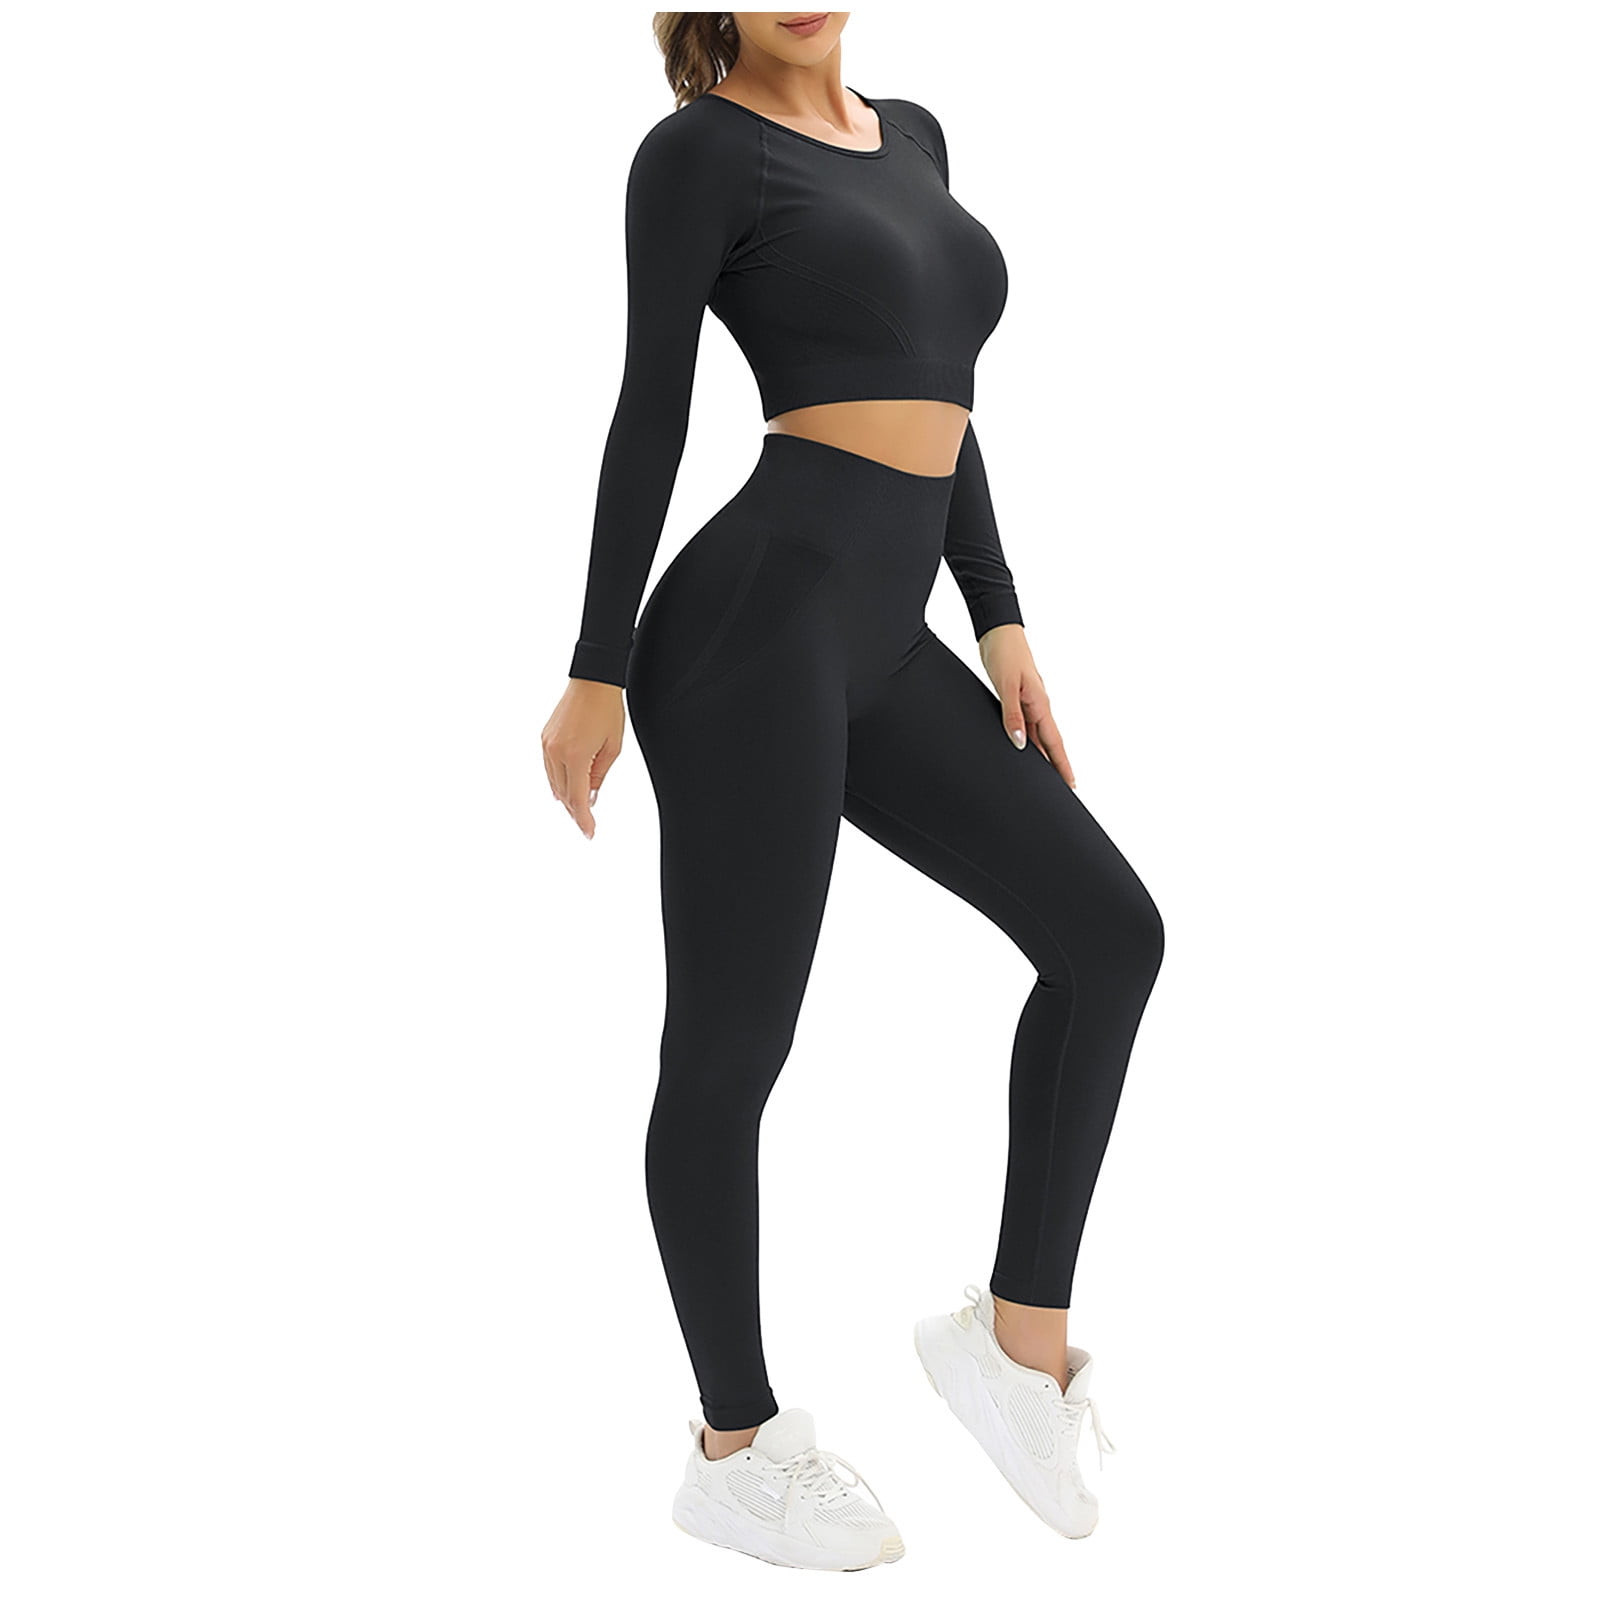 High Quality Yoga Gym Set 2 Piece Outfit Seamless Home Workout Clothes for Women  Fitness Legging Long Sleeve Crop Top S-XL